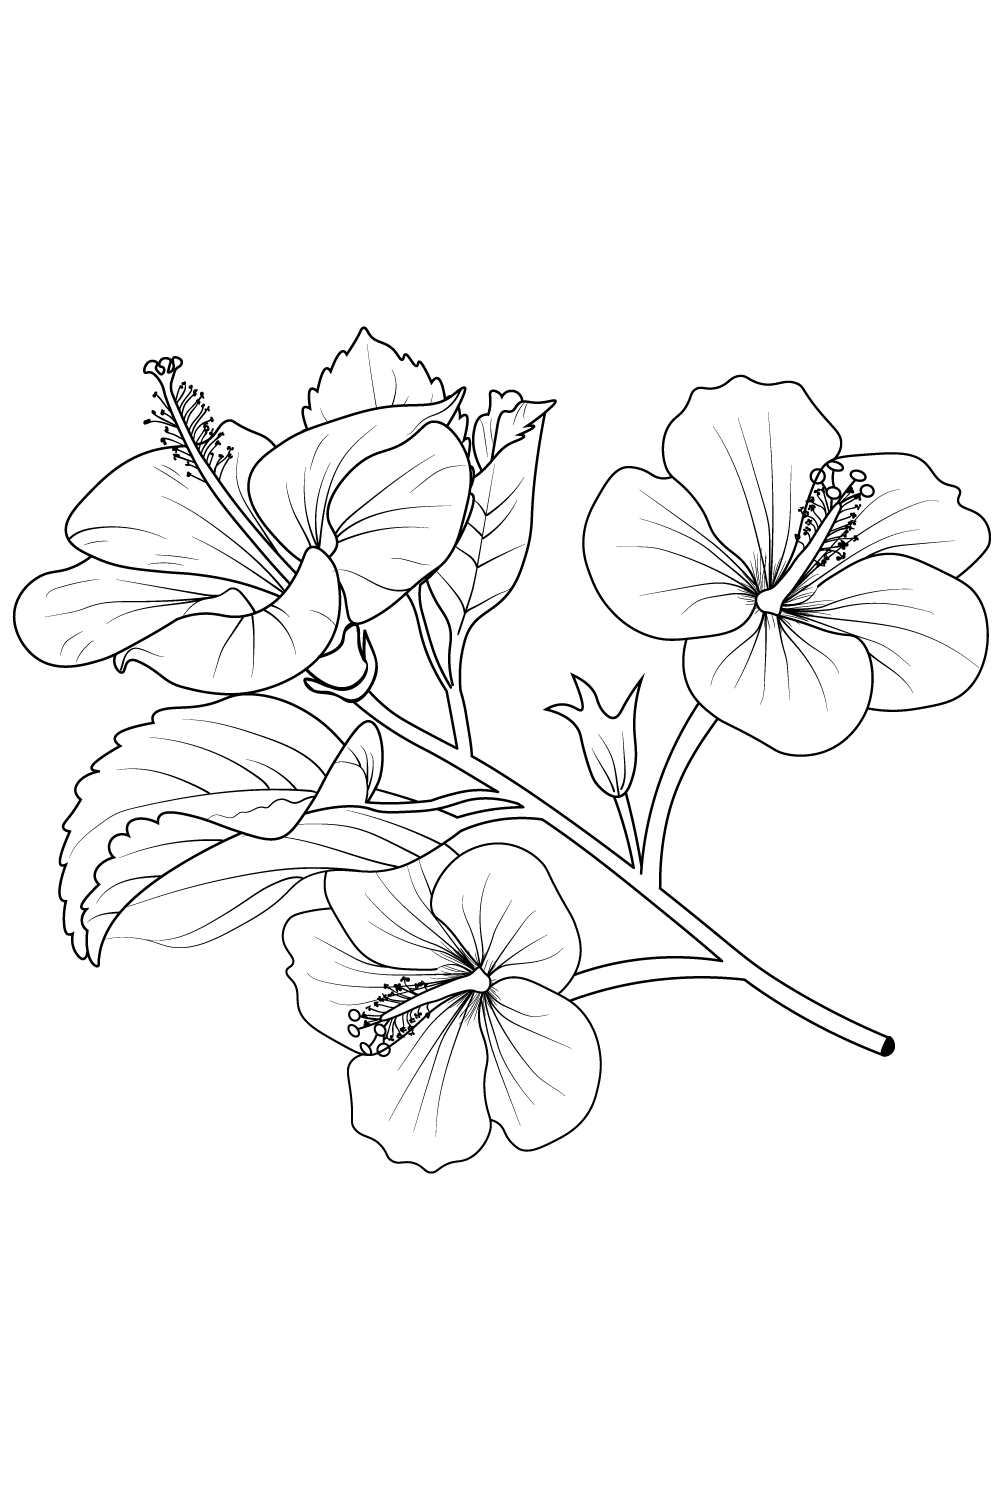 Hibiscus flowe drawing Hibiscus flower tattoo Hibiscus flower outline Hibiscus flower painting Hibiscus flower clipart pinterest preview image.